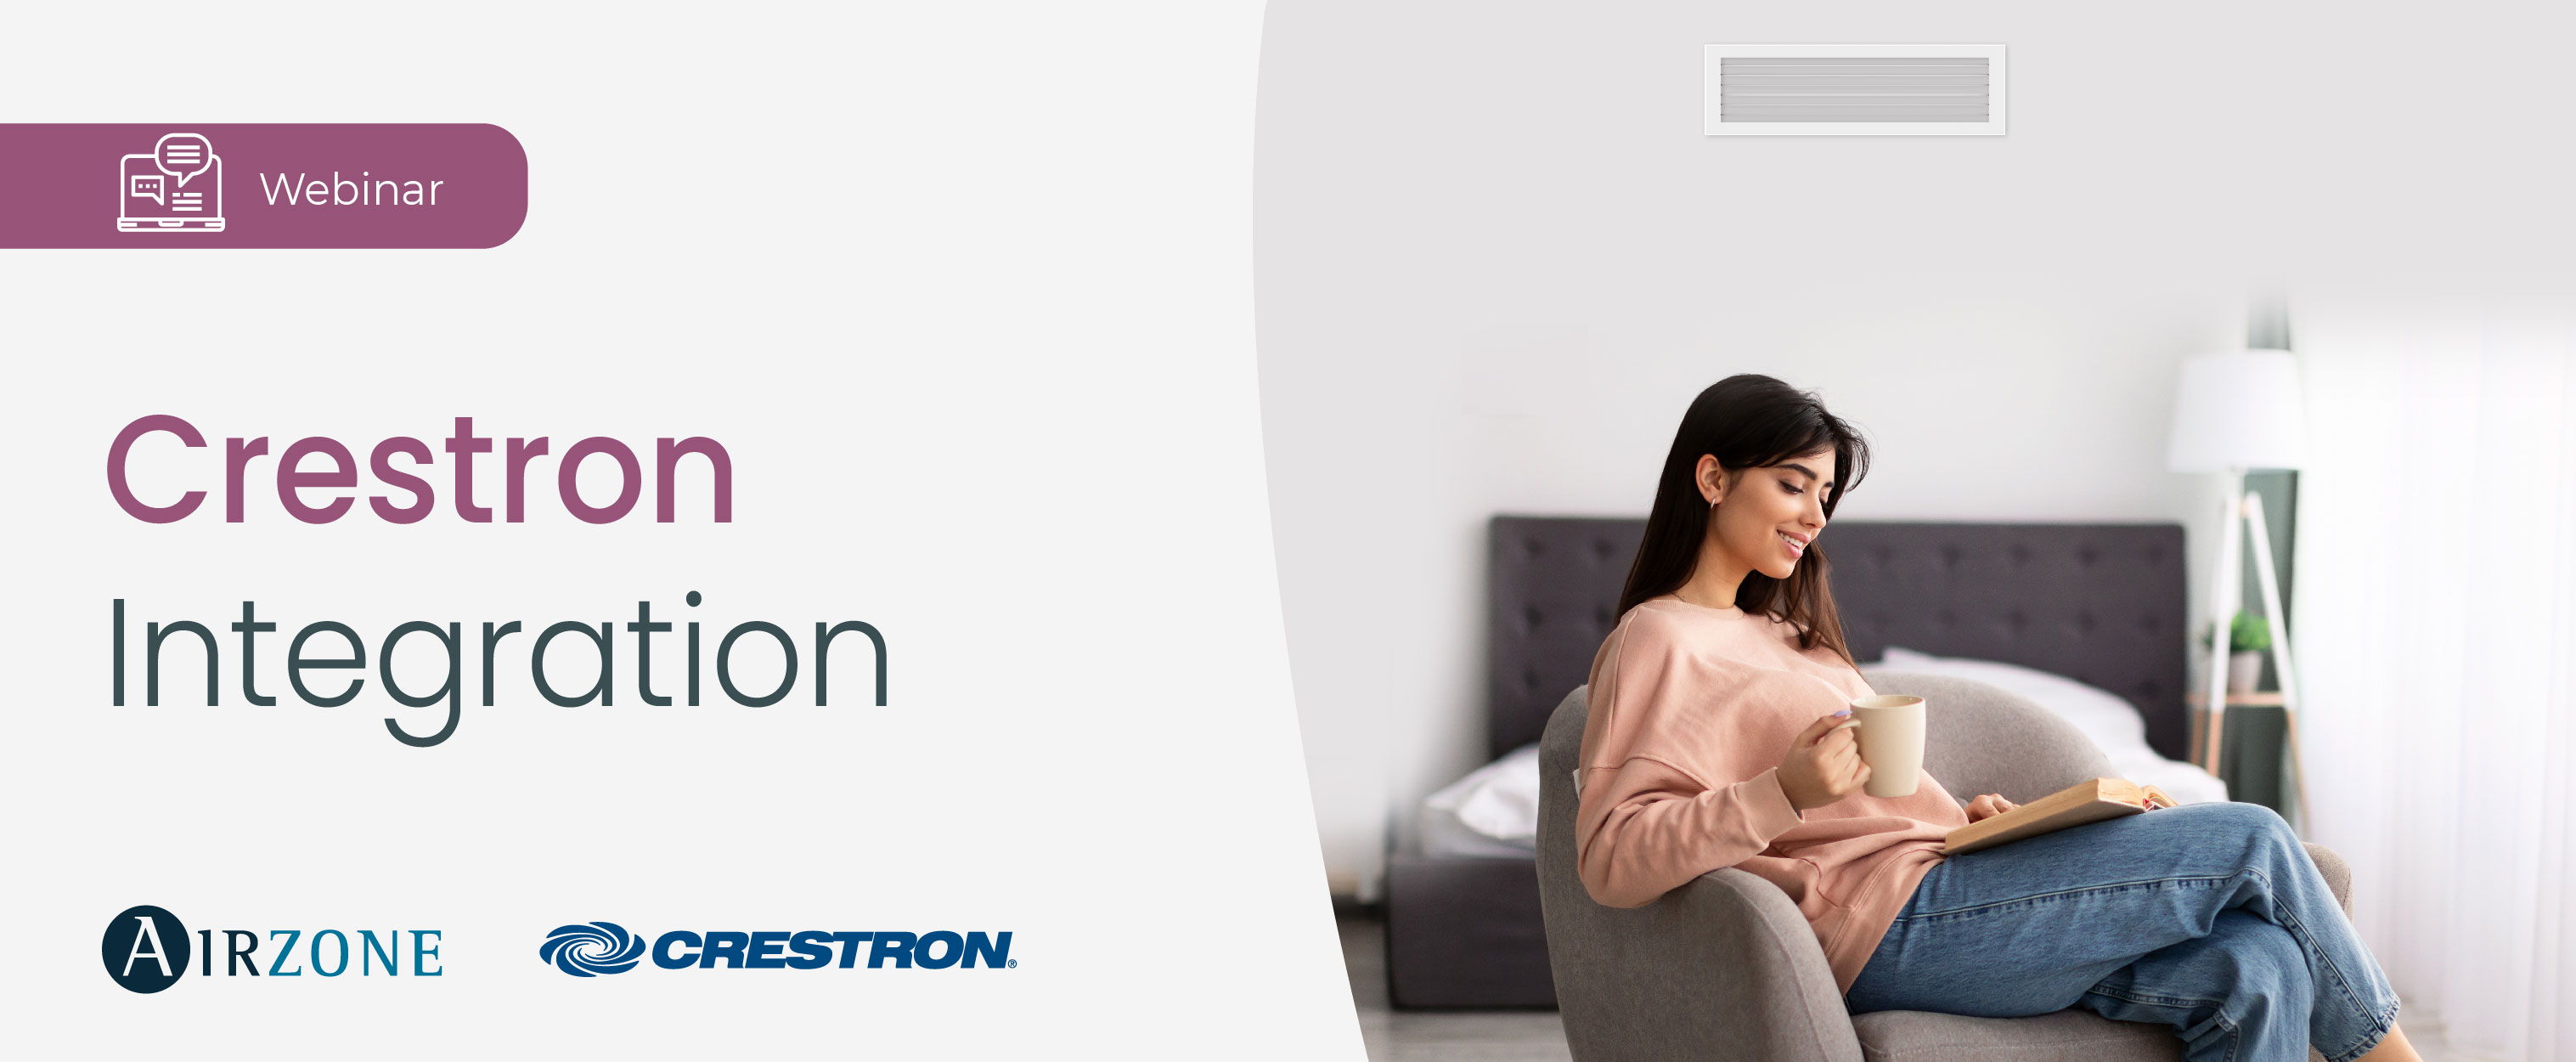  Crestron HVAC Integration with Airzone